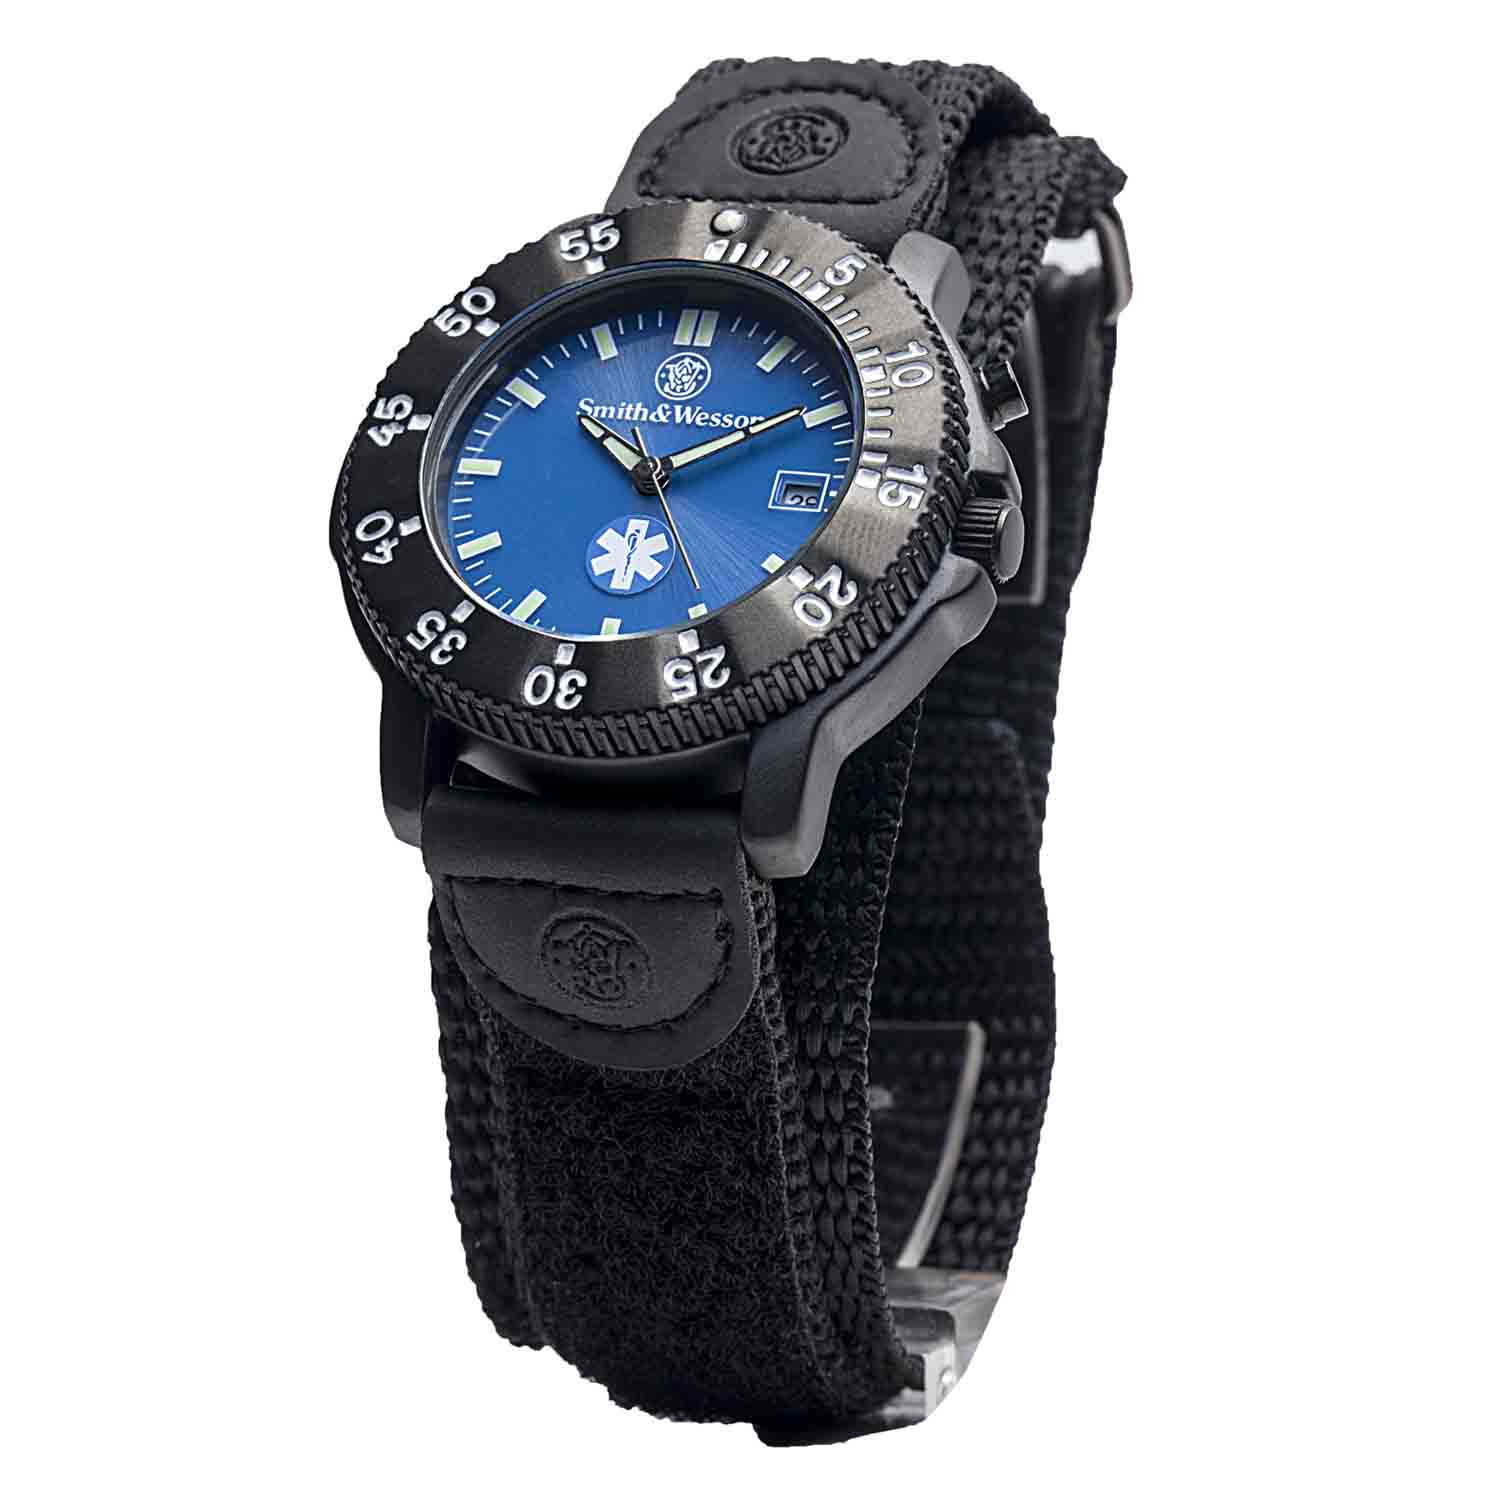 Smith & Wesson EMS/EMT Watch